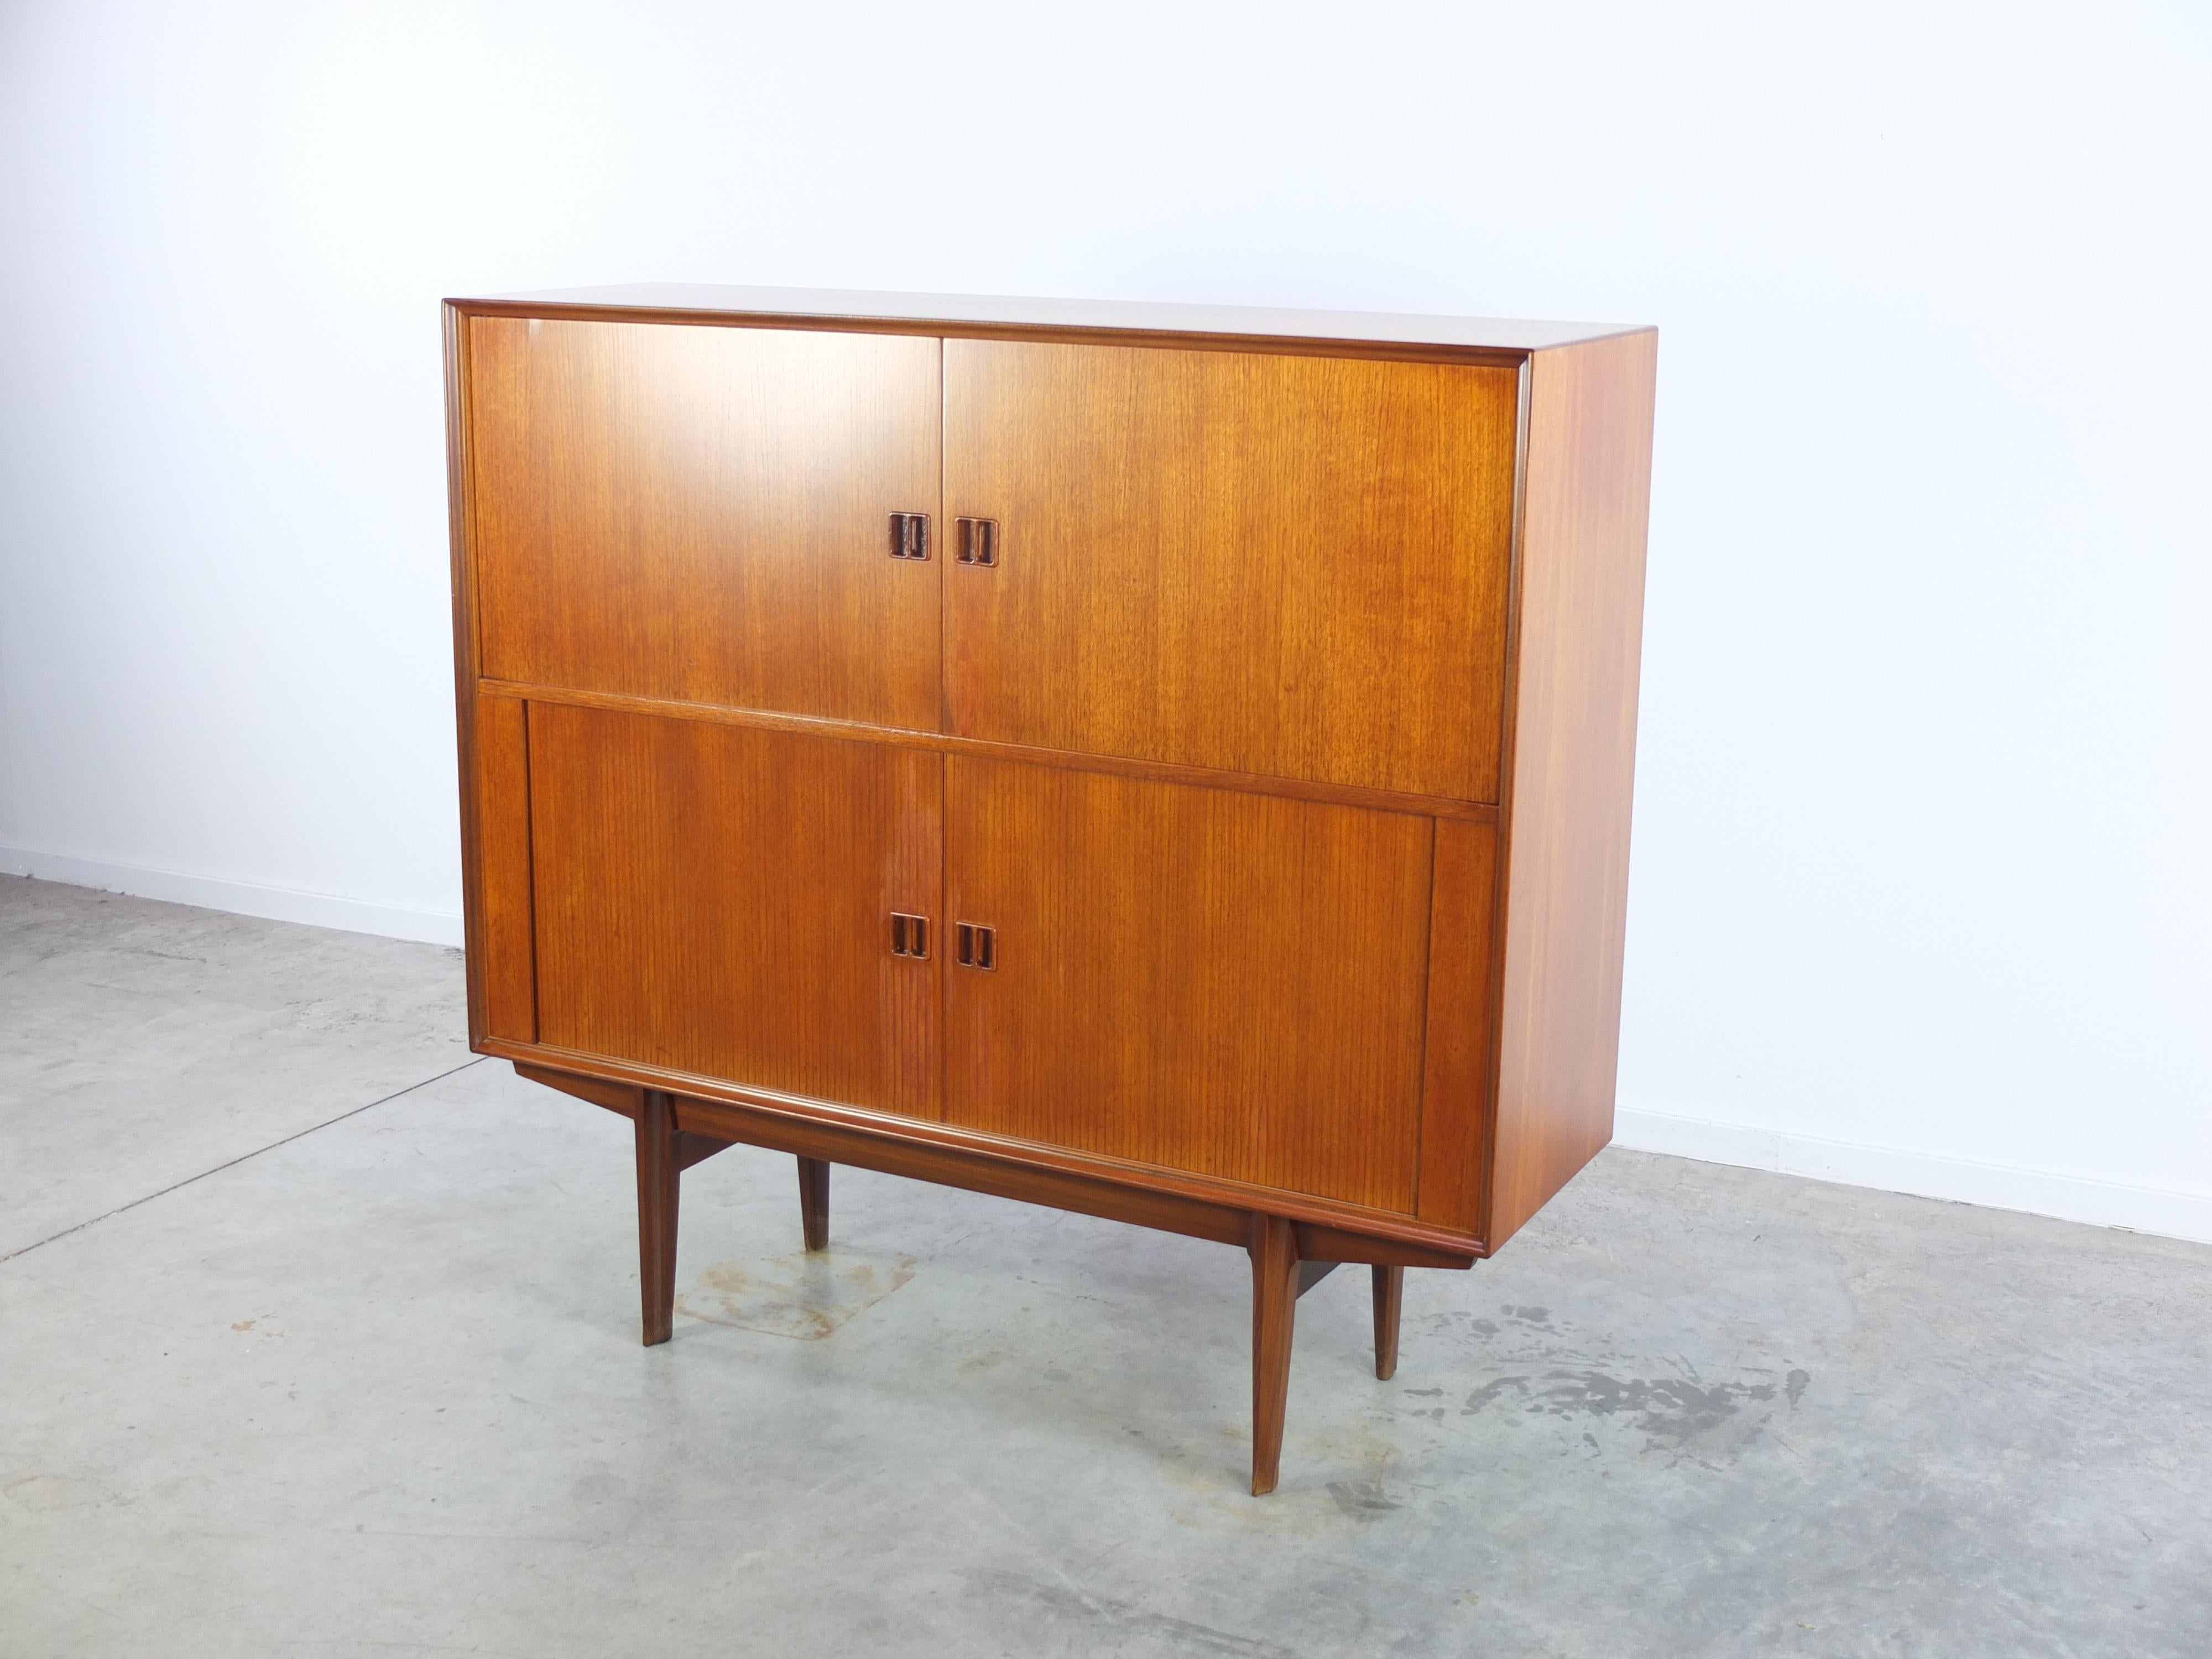 Lovely teak bar cabinet designed by Oswald Vermaercke for V-Form in Belgium during the 1960s. This model comes with two normal doors on the upper side and two beautiful tambour doors below. In mint restored condition.